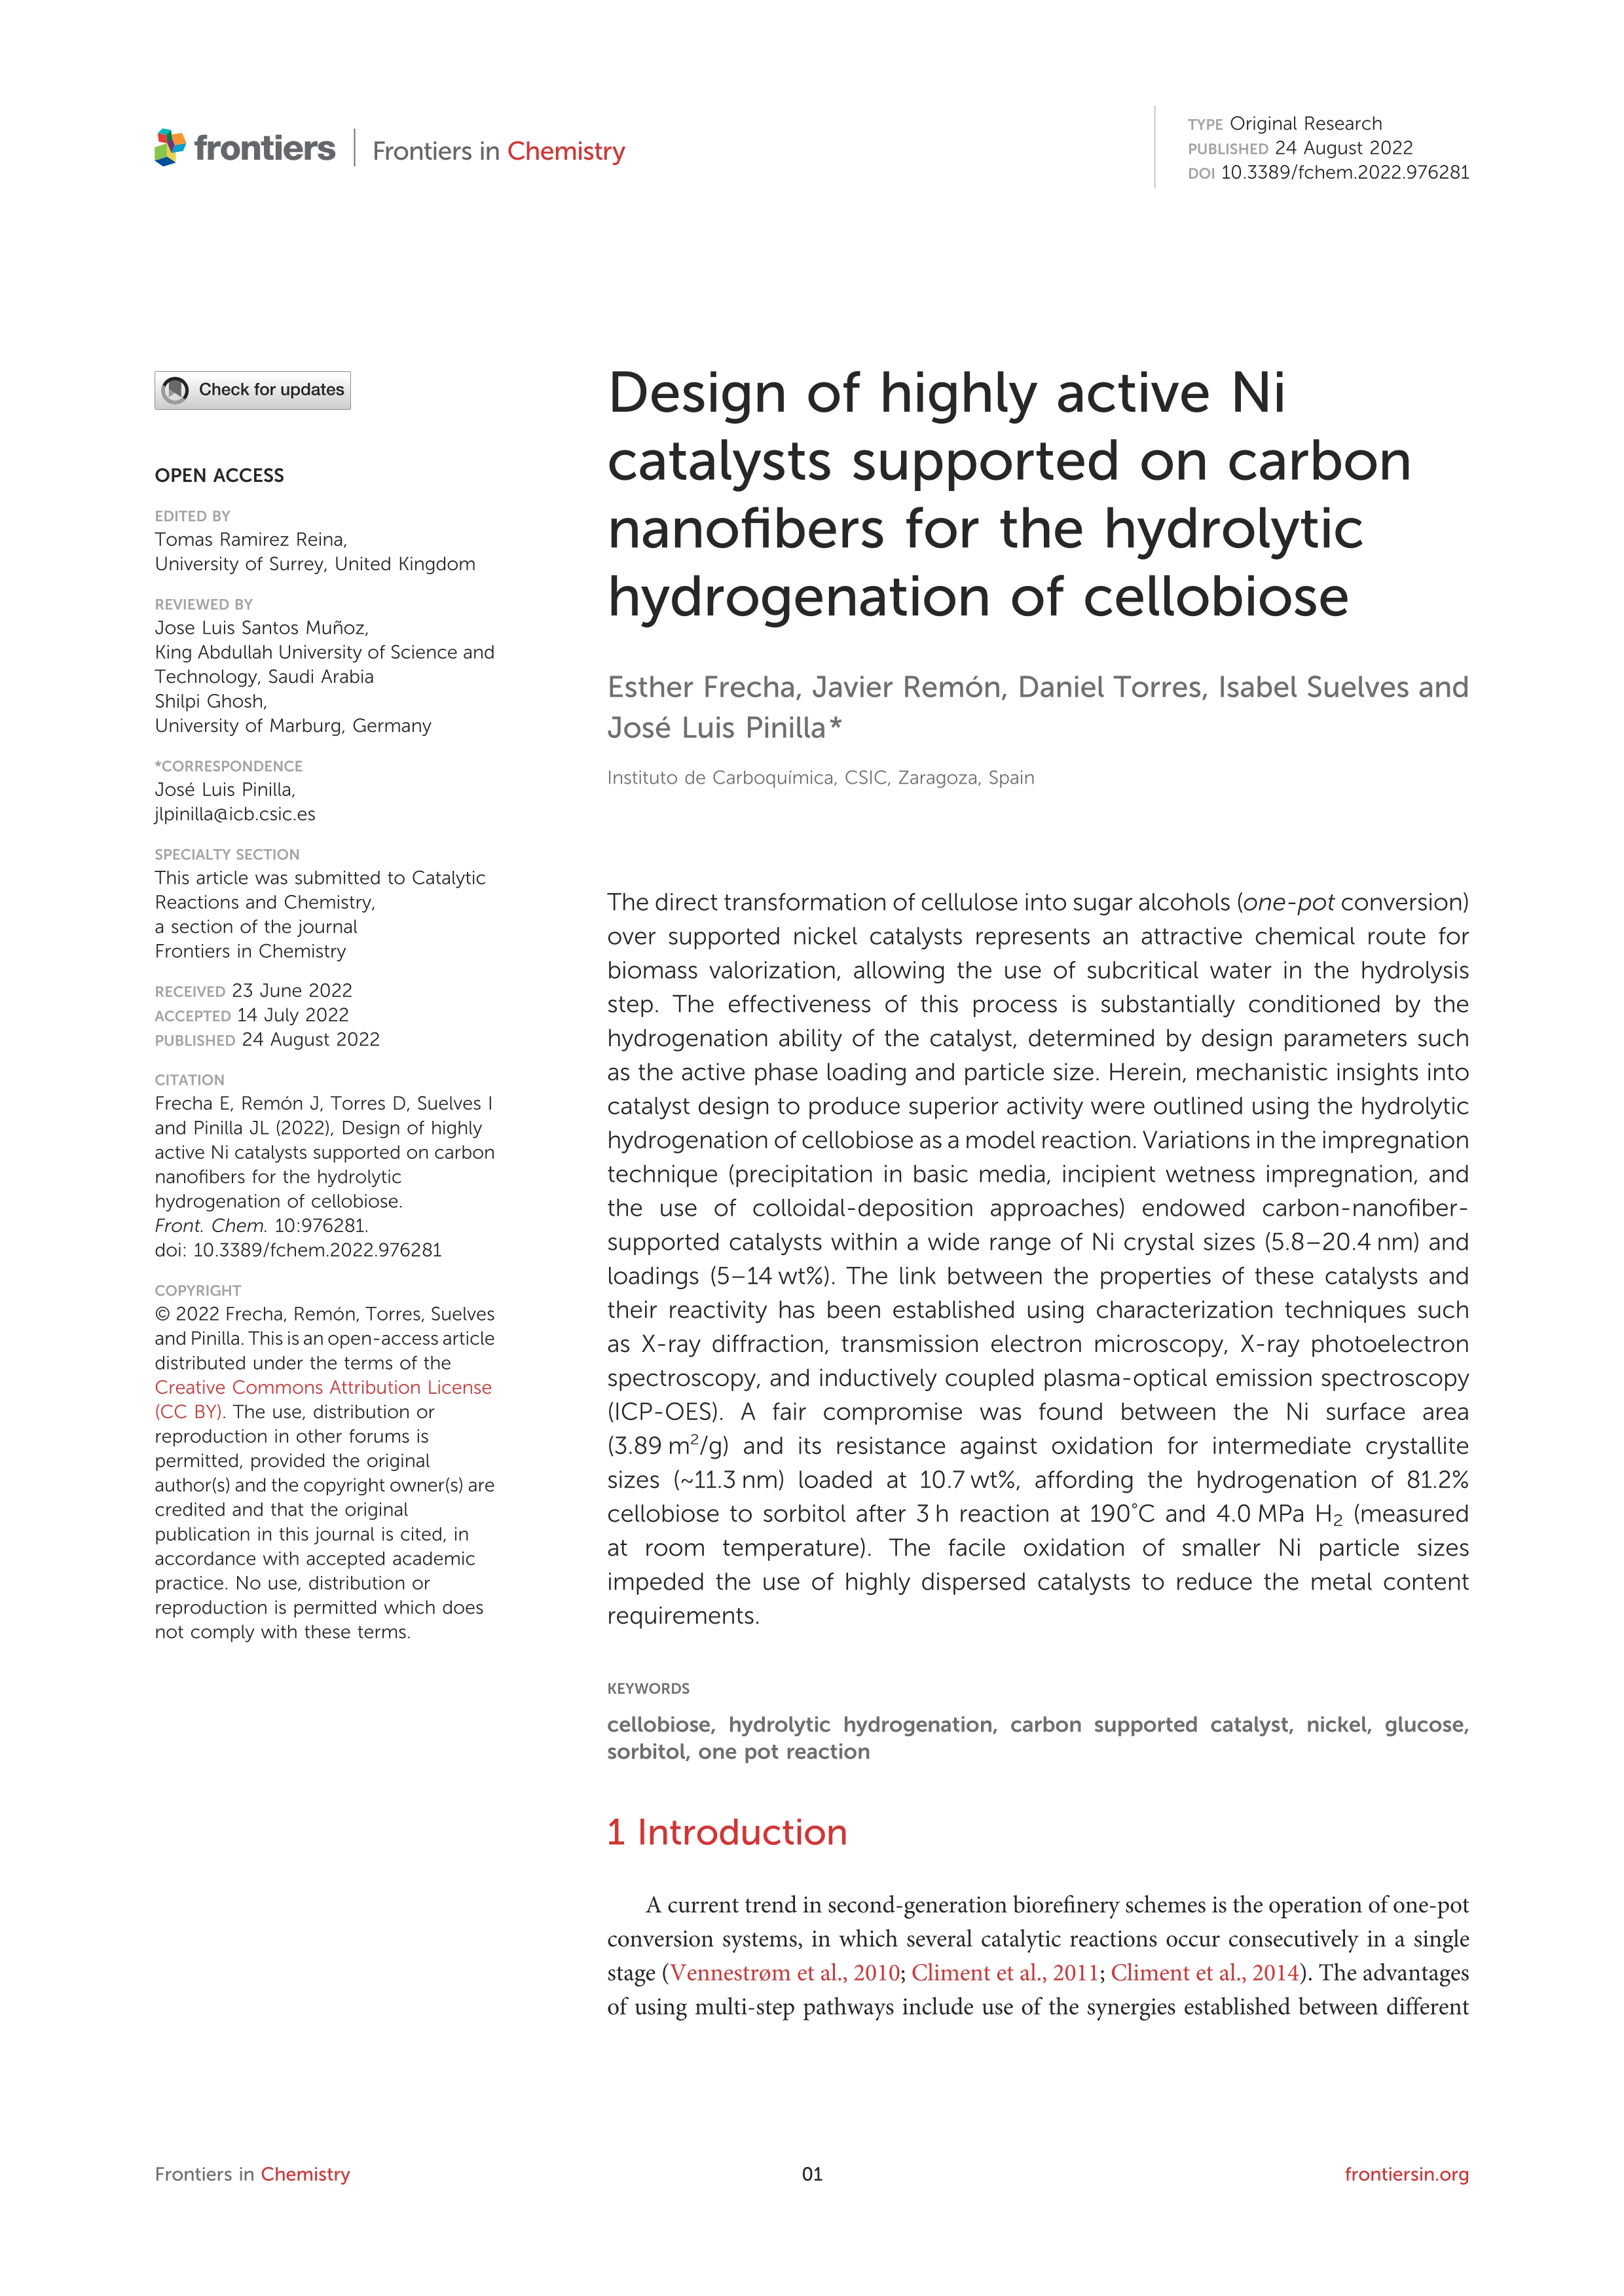 Design of highly active Ni catalysts supported on carbon nanofibers for the hydrolytic hydrogenation of cellobiose